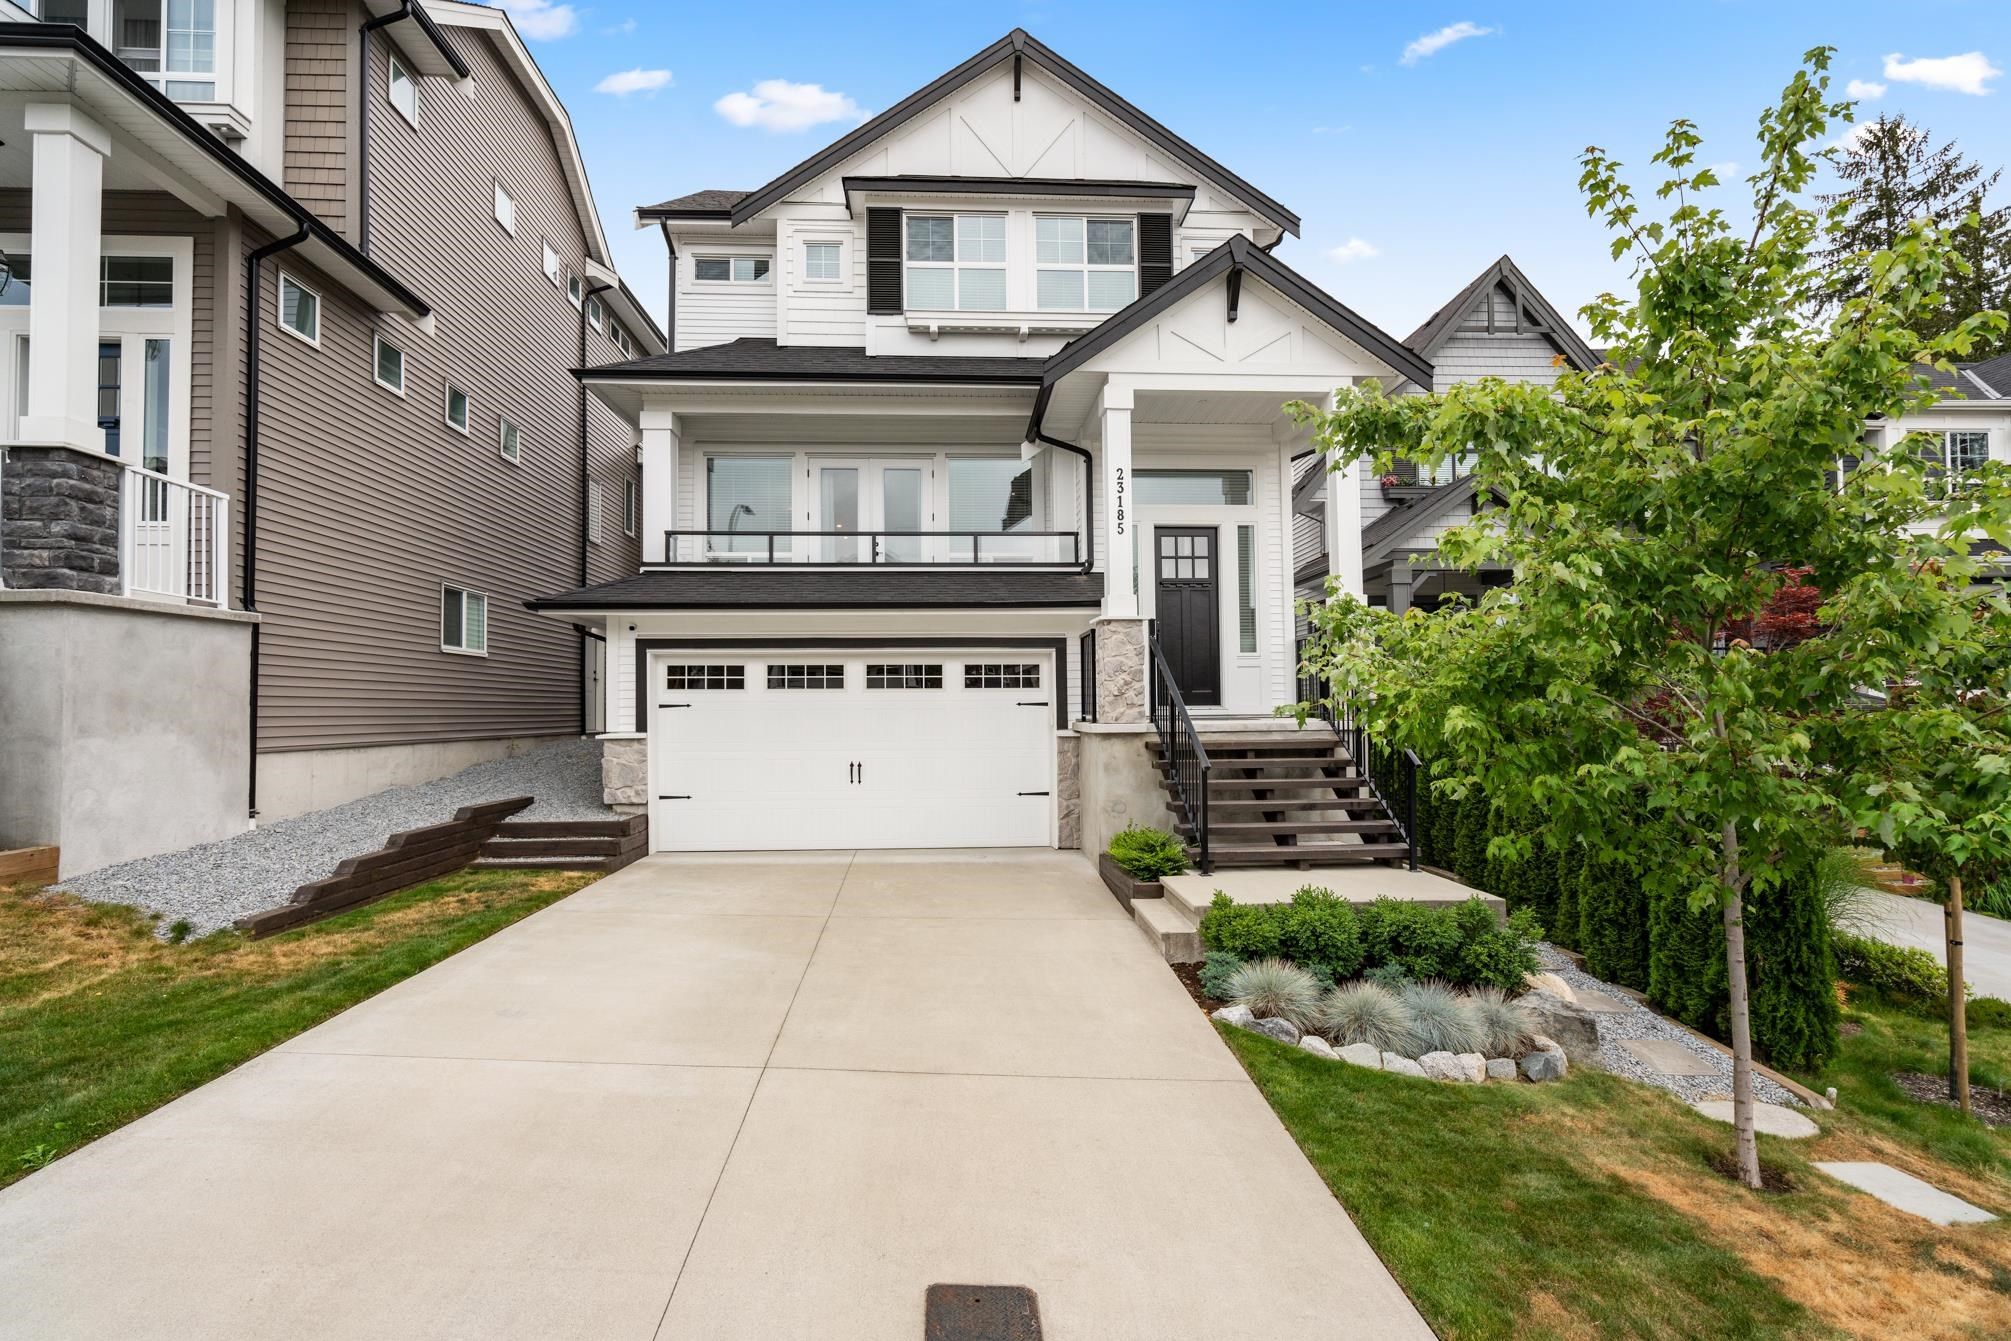 I have sold a property at 23185 113 AVE in Maple Ridge